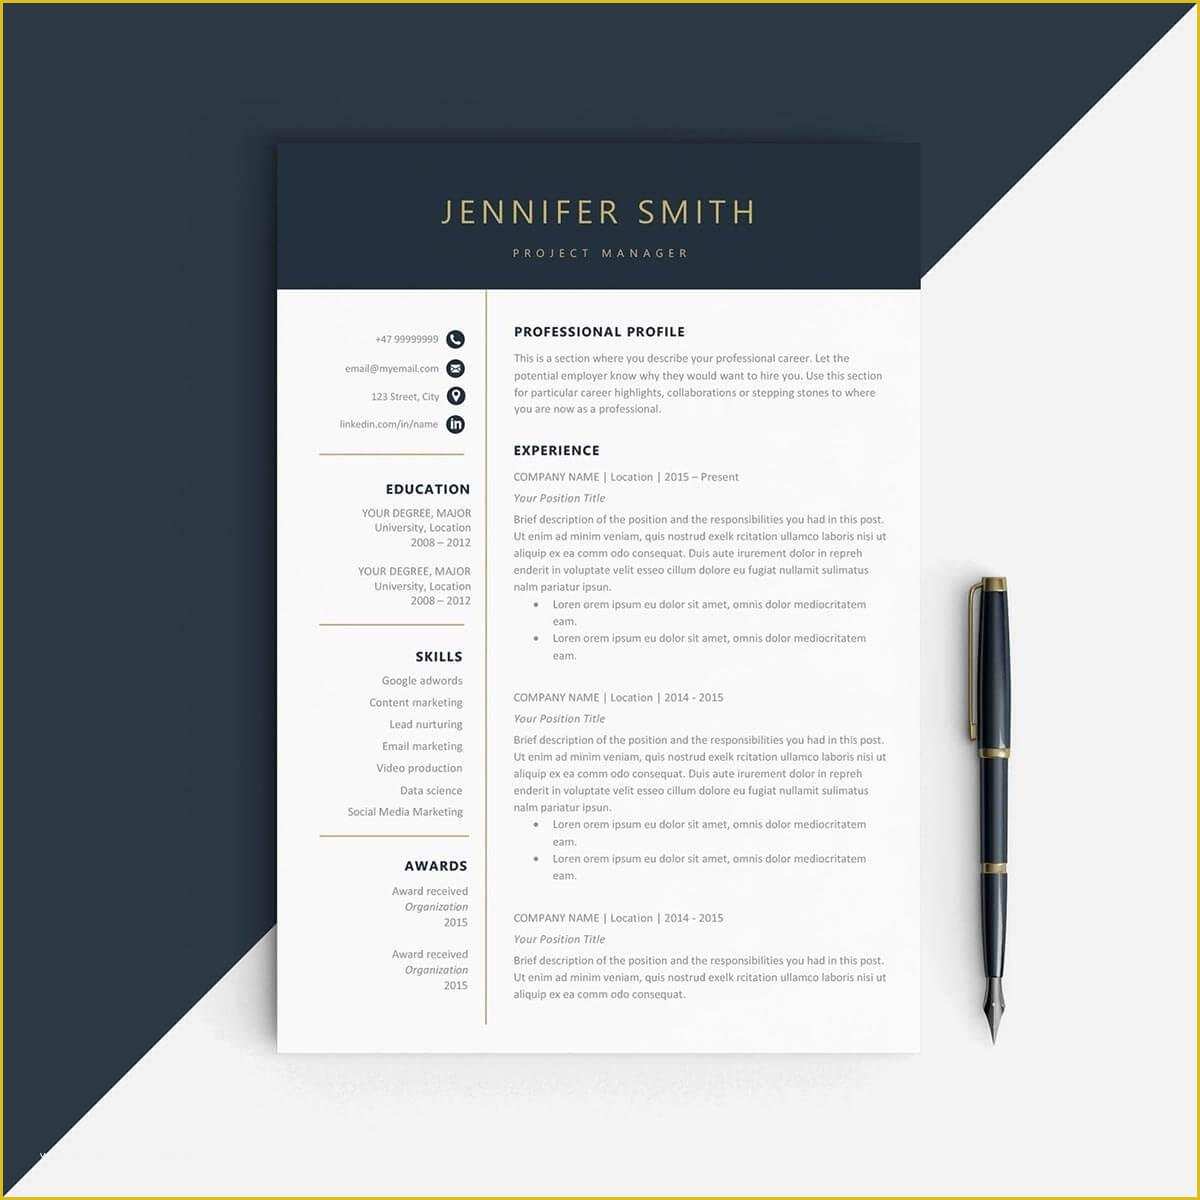 Single Page Resume Template Free Of E Page Resume Templates 15 Examples to Download and Use now